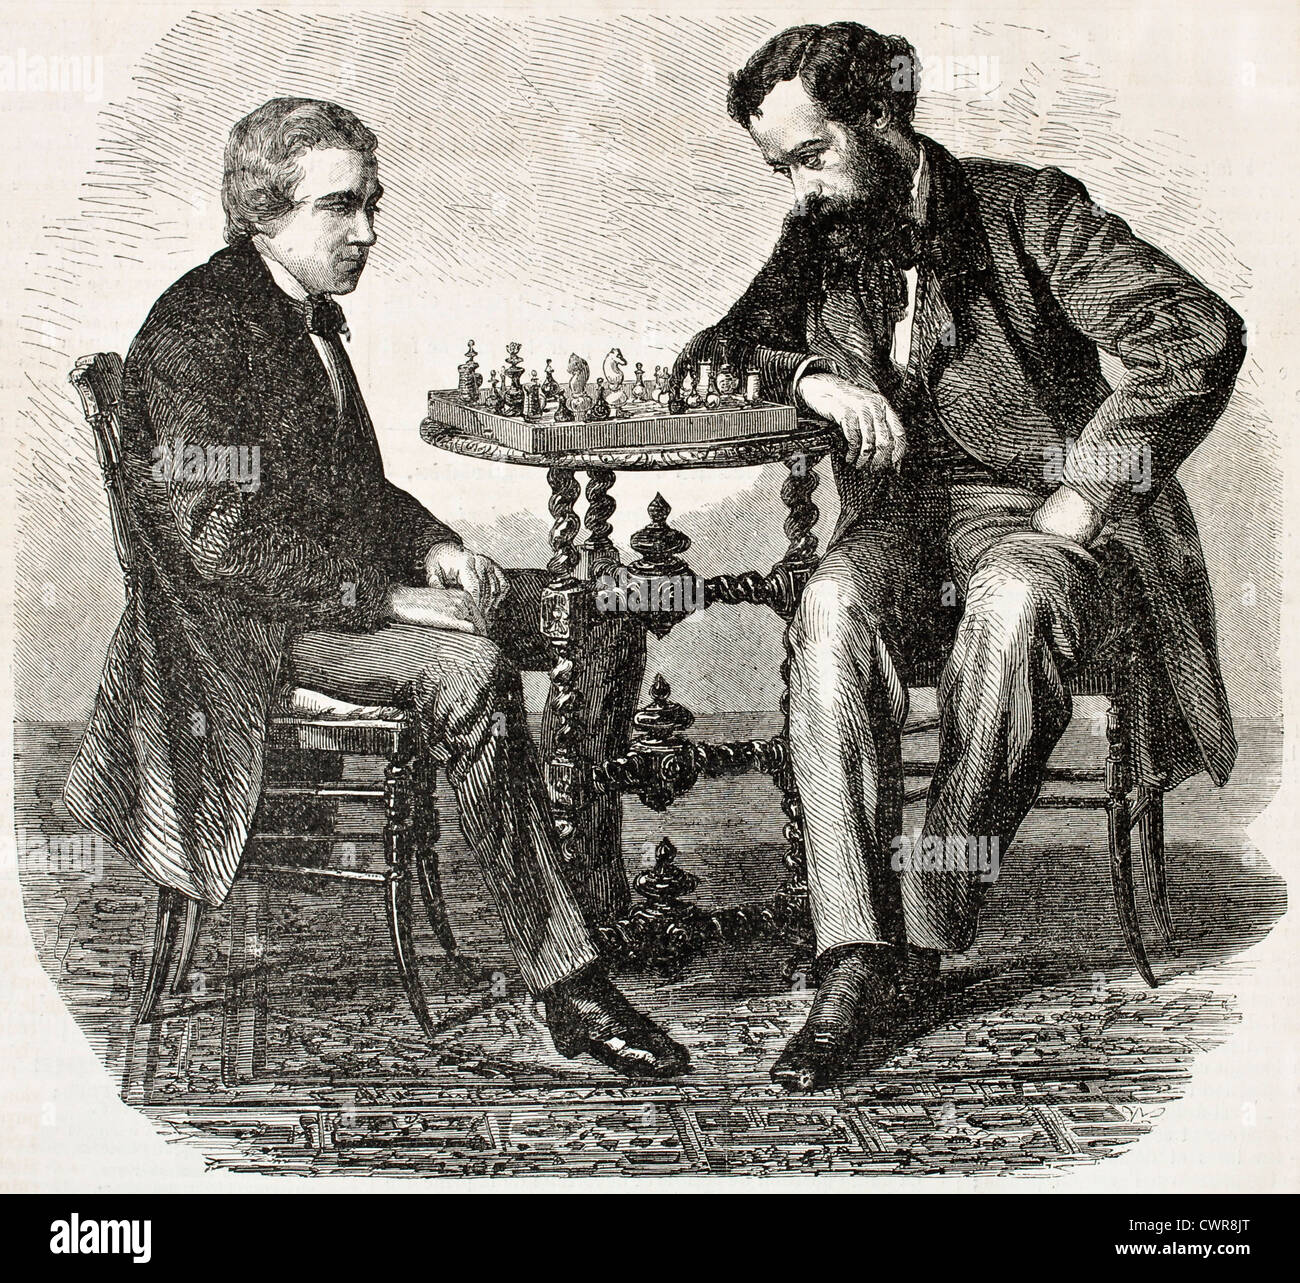 Paul Morphy, The Chess Champion, 1859. by Winslow Homer